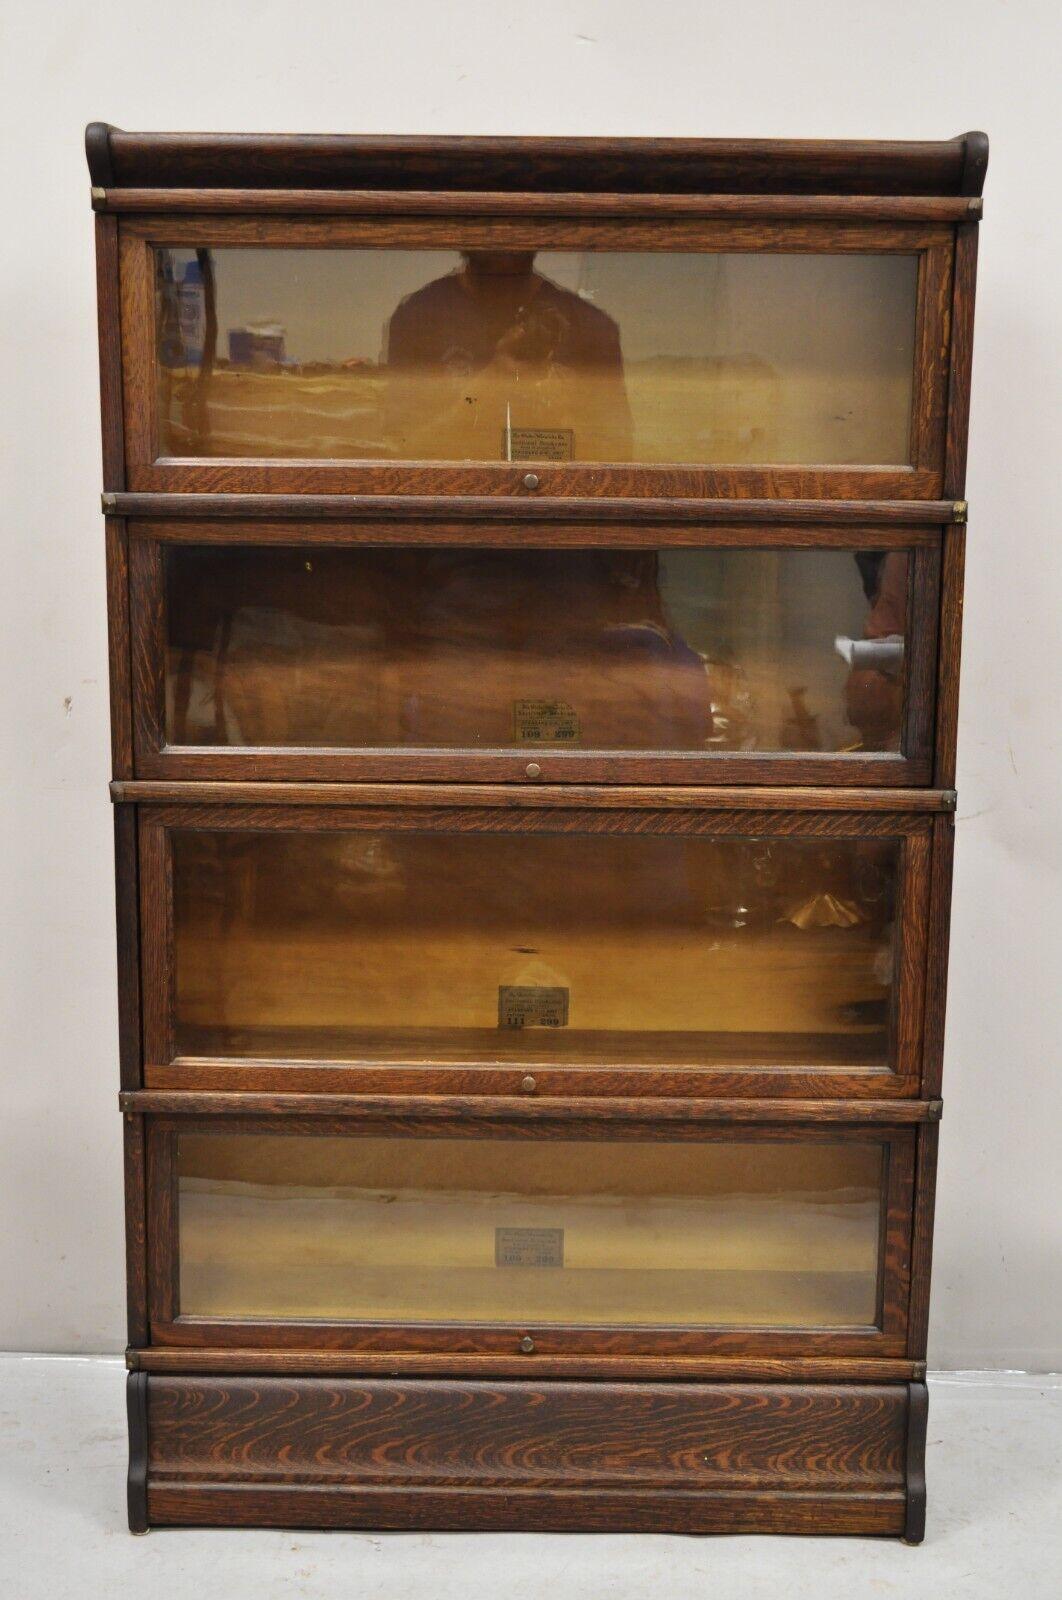 Antique Globe Wernicke Quartersawn Oak Four Section Stacking Barrister Bookcase. Item features (4) sections, (1) top, (1) bottom, original labels, (3) sections labeled pattern 109 grade 299, (1) labeled pattern 111 grade 299, very nice antique set.